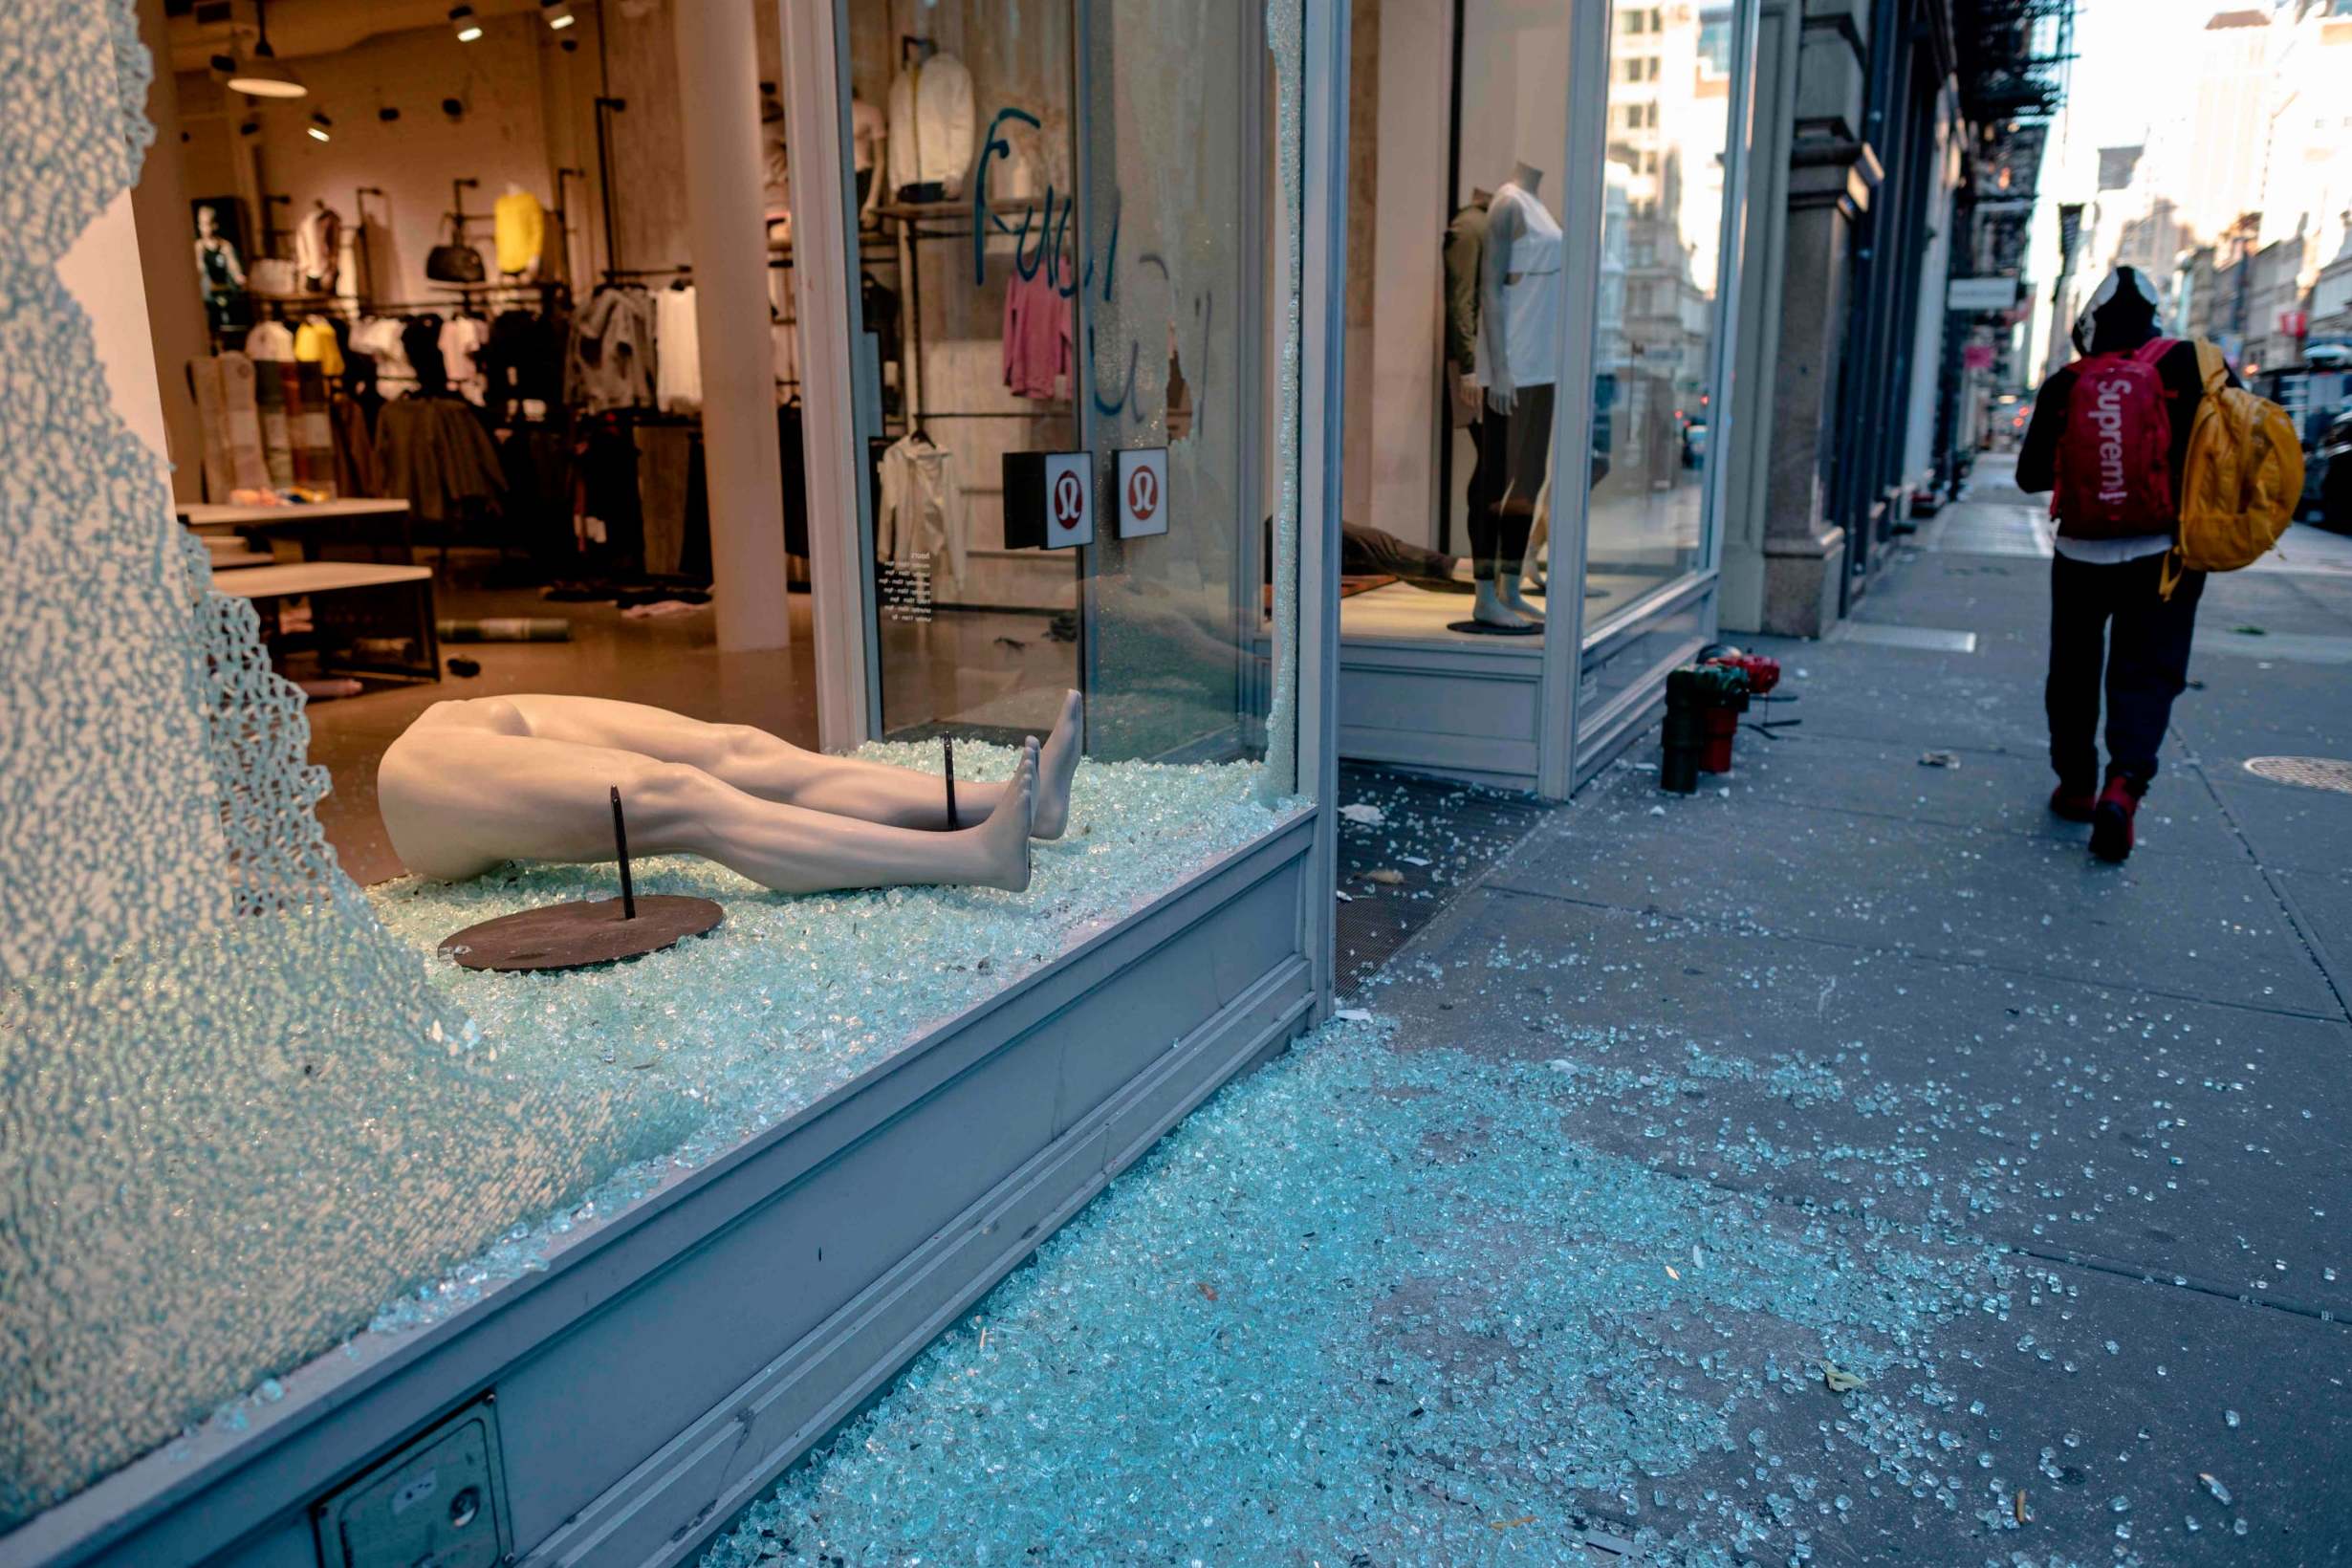 A looted and destroyed shop after protests in Lower Manhattan, New York City (AFP/Getty)